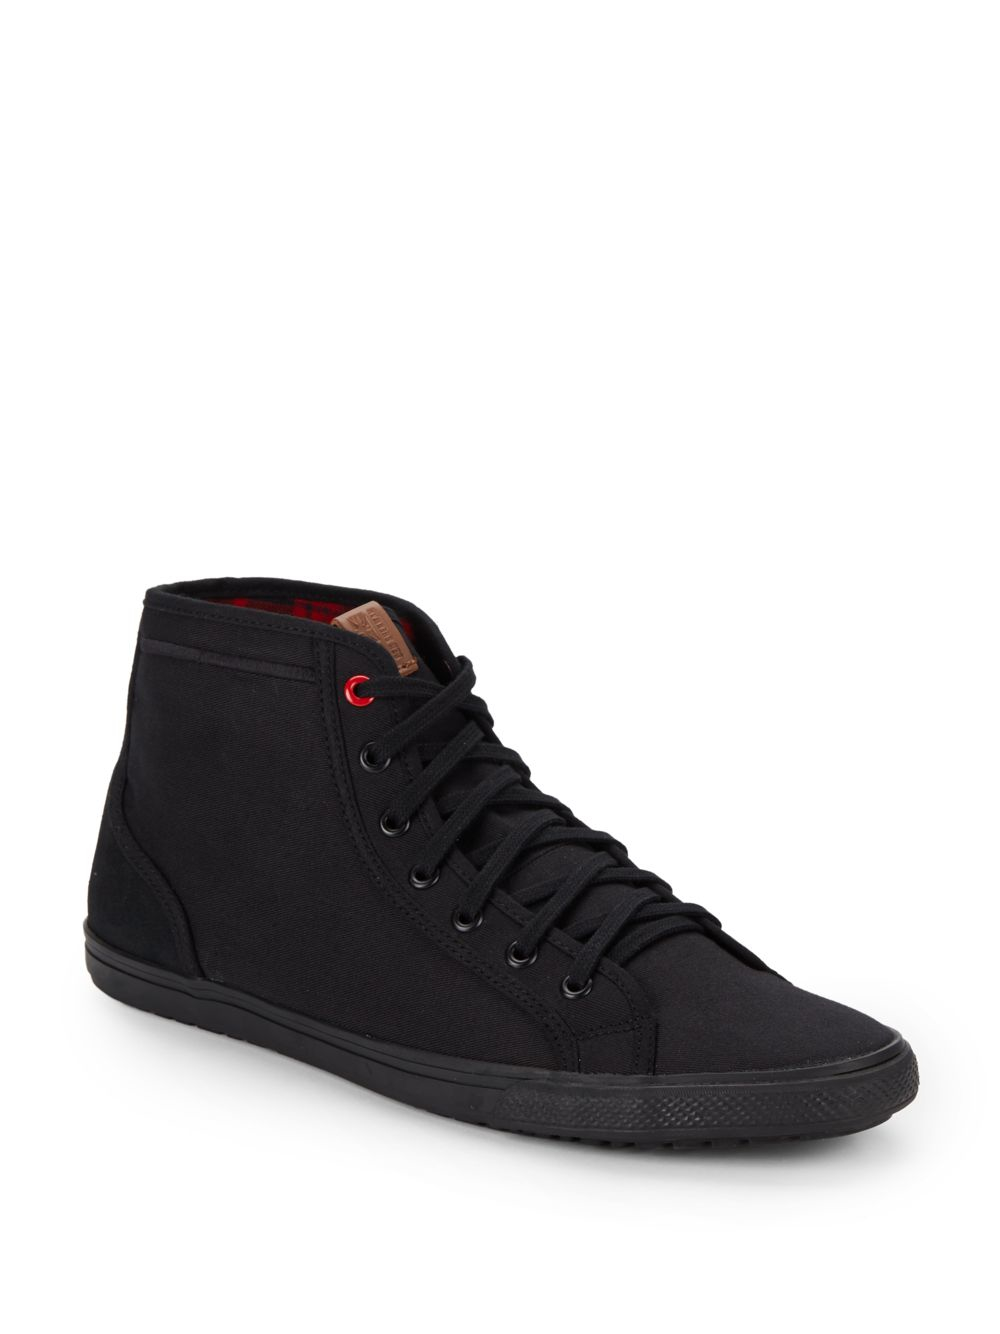 Ben Sherman Connall Suede Paneled High-top Sneakers in Black for Men | Lyst